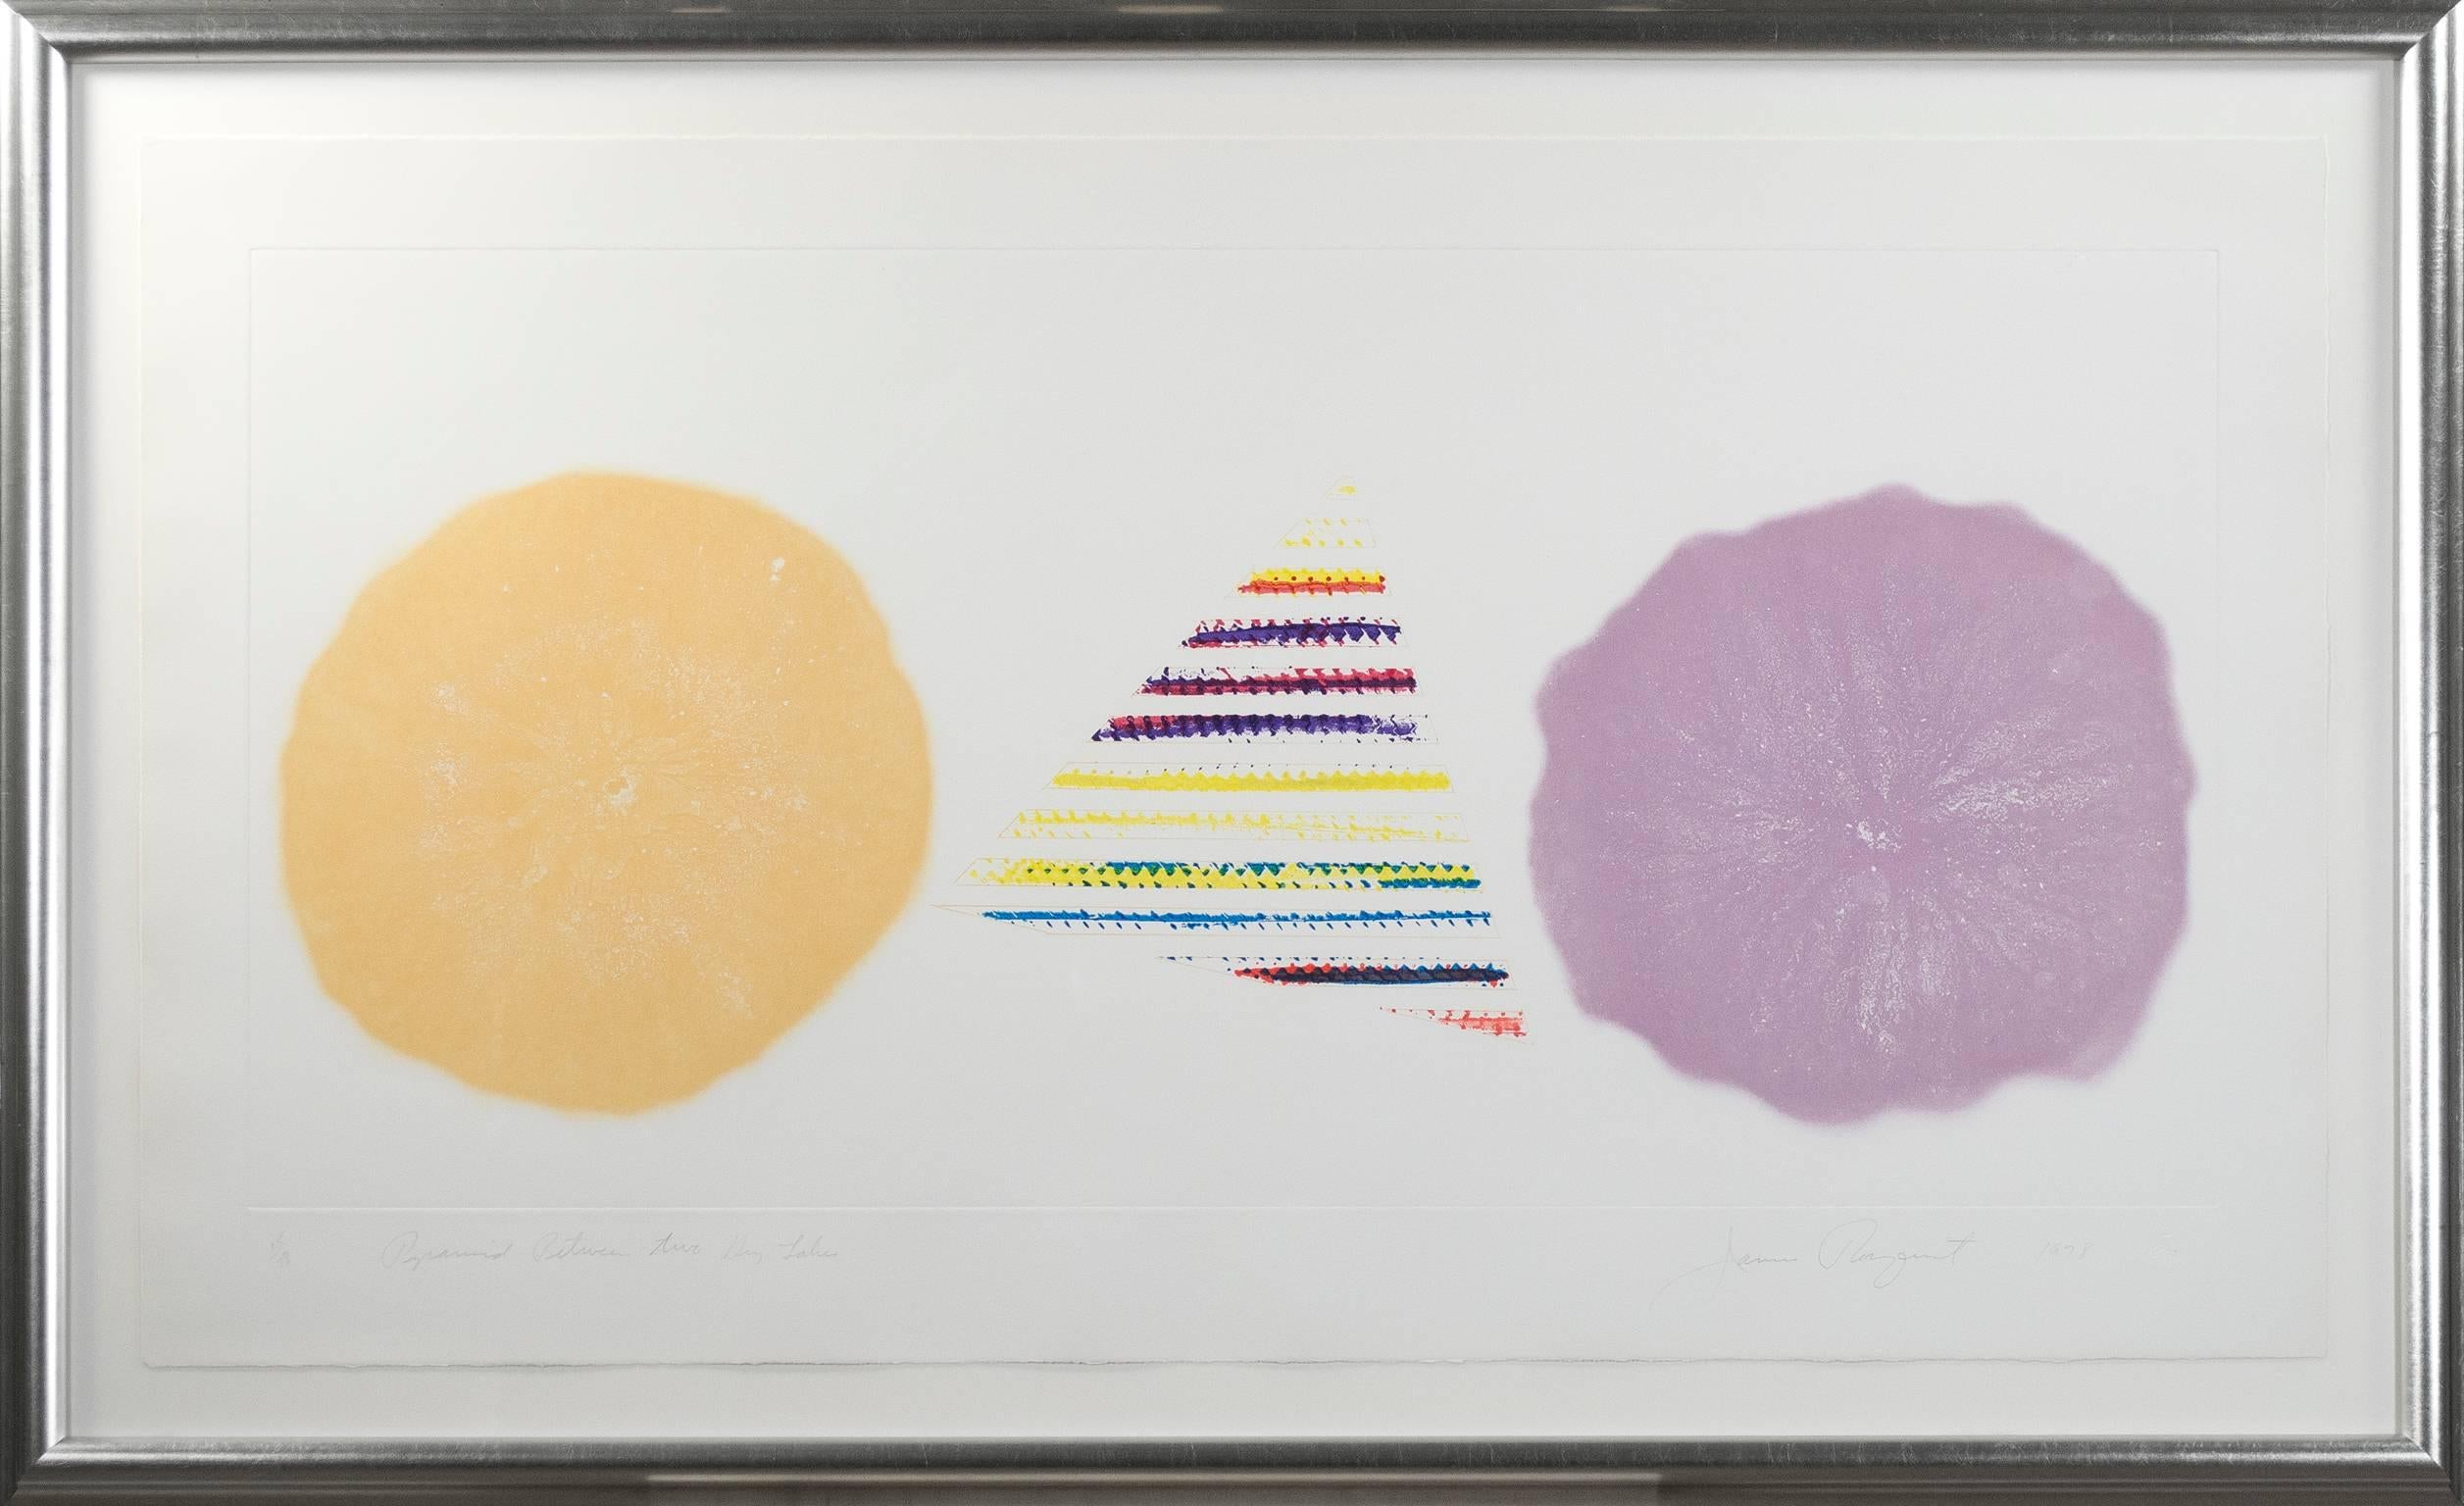 Pyramid Between Two Dry Lakes - Print by James Rosenquist